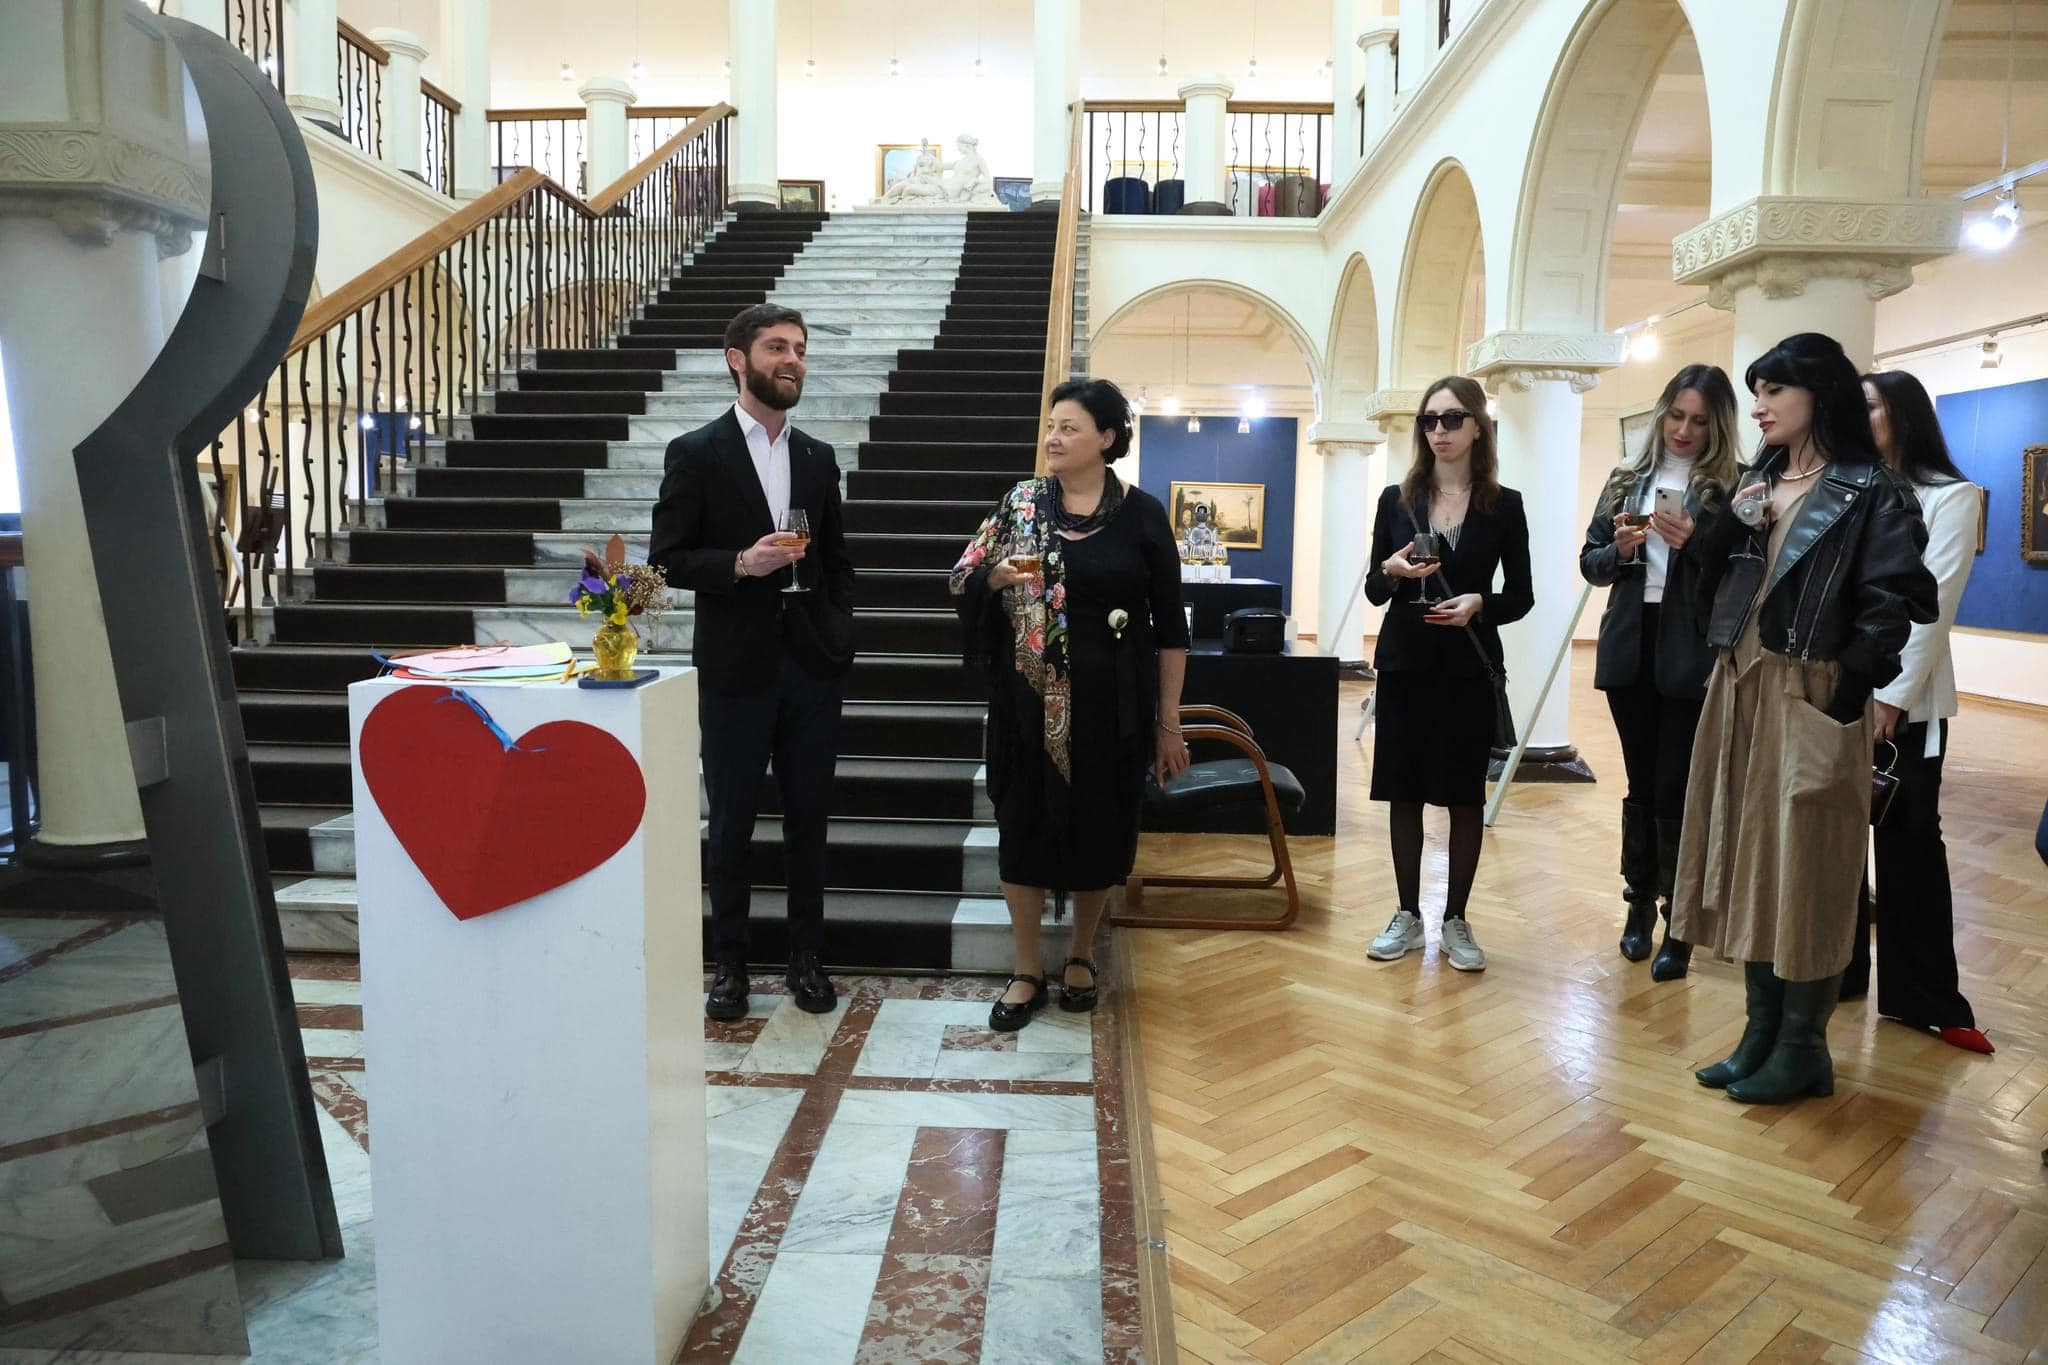 World Art Day was celebrated at the Art Museum on 15 April. On the same day, the Day of Love is also celebrated in Georgia.